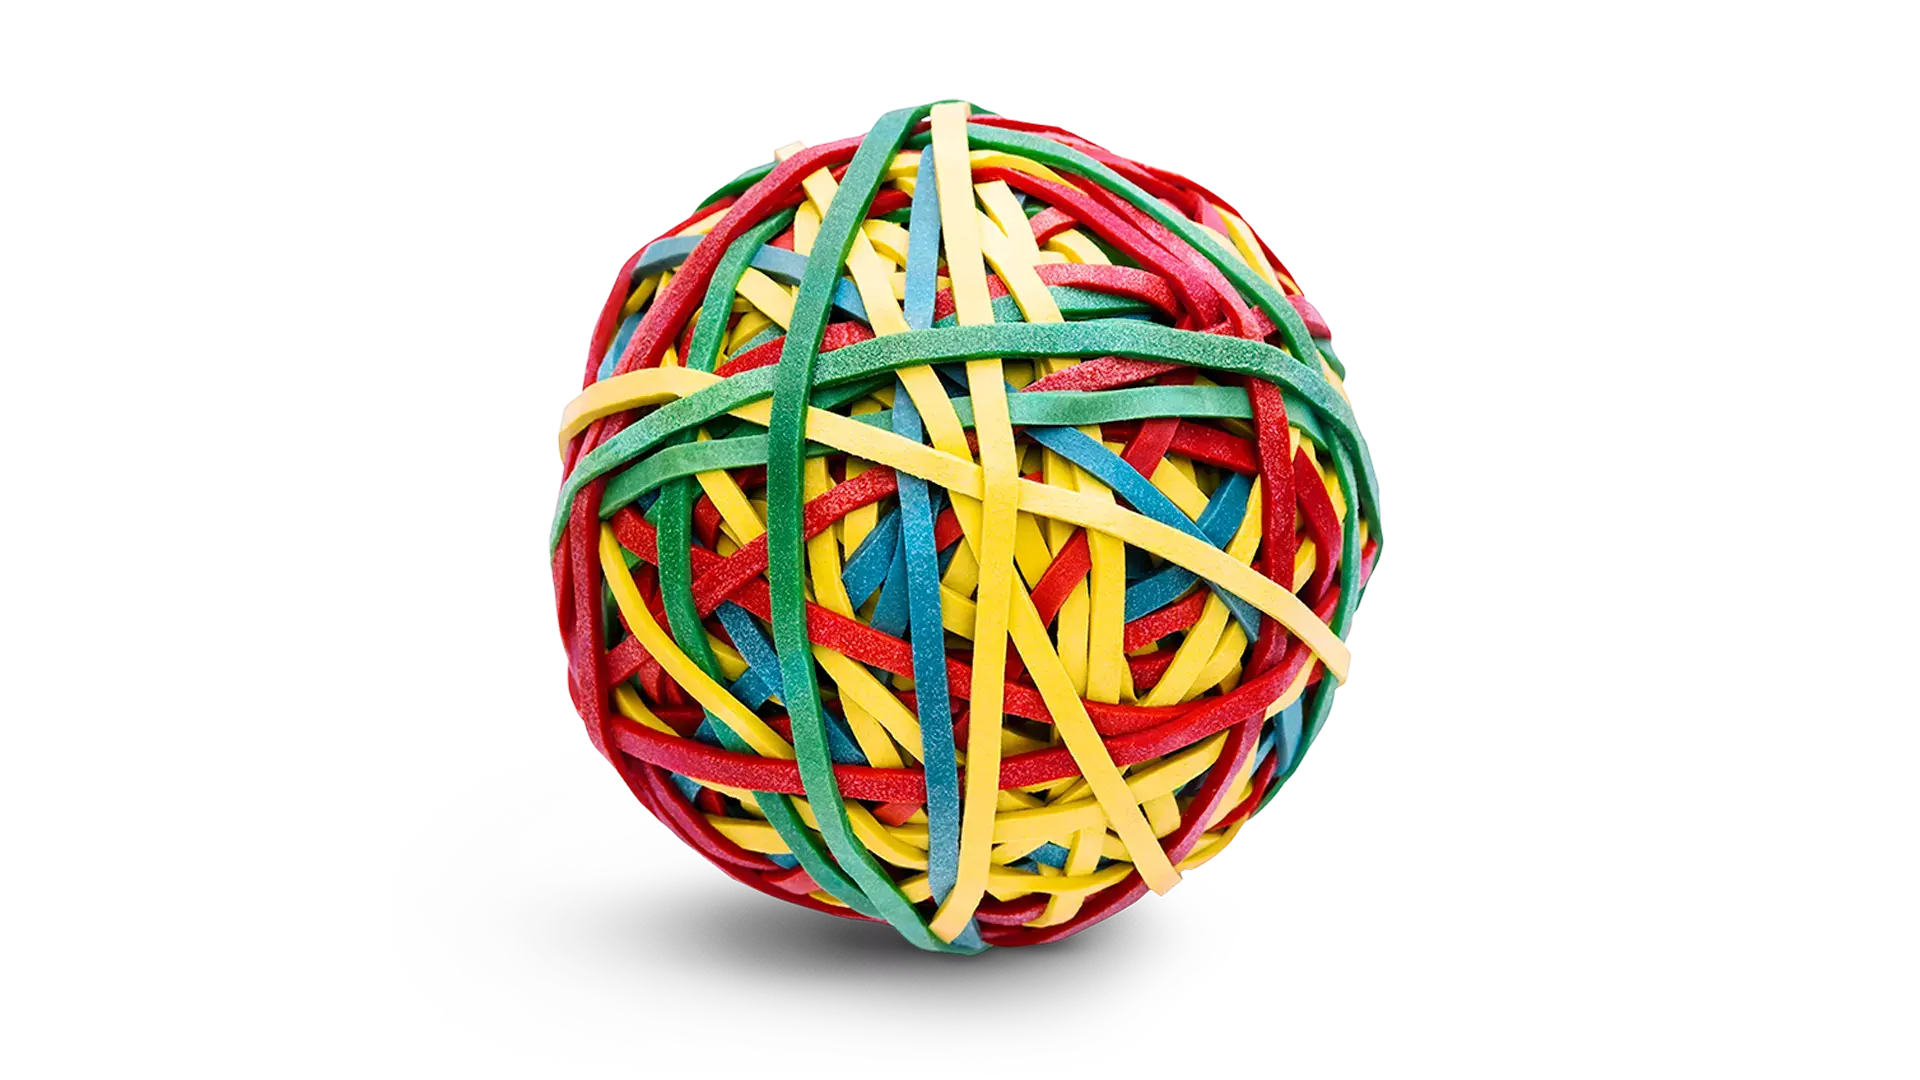 A ball consisting of rubber bands.